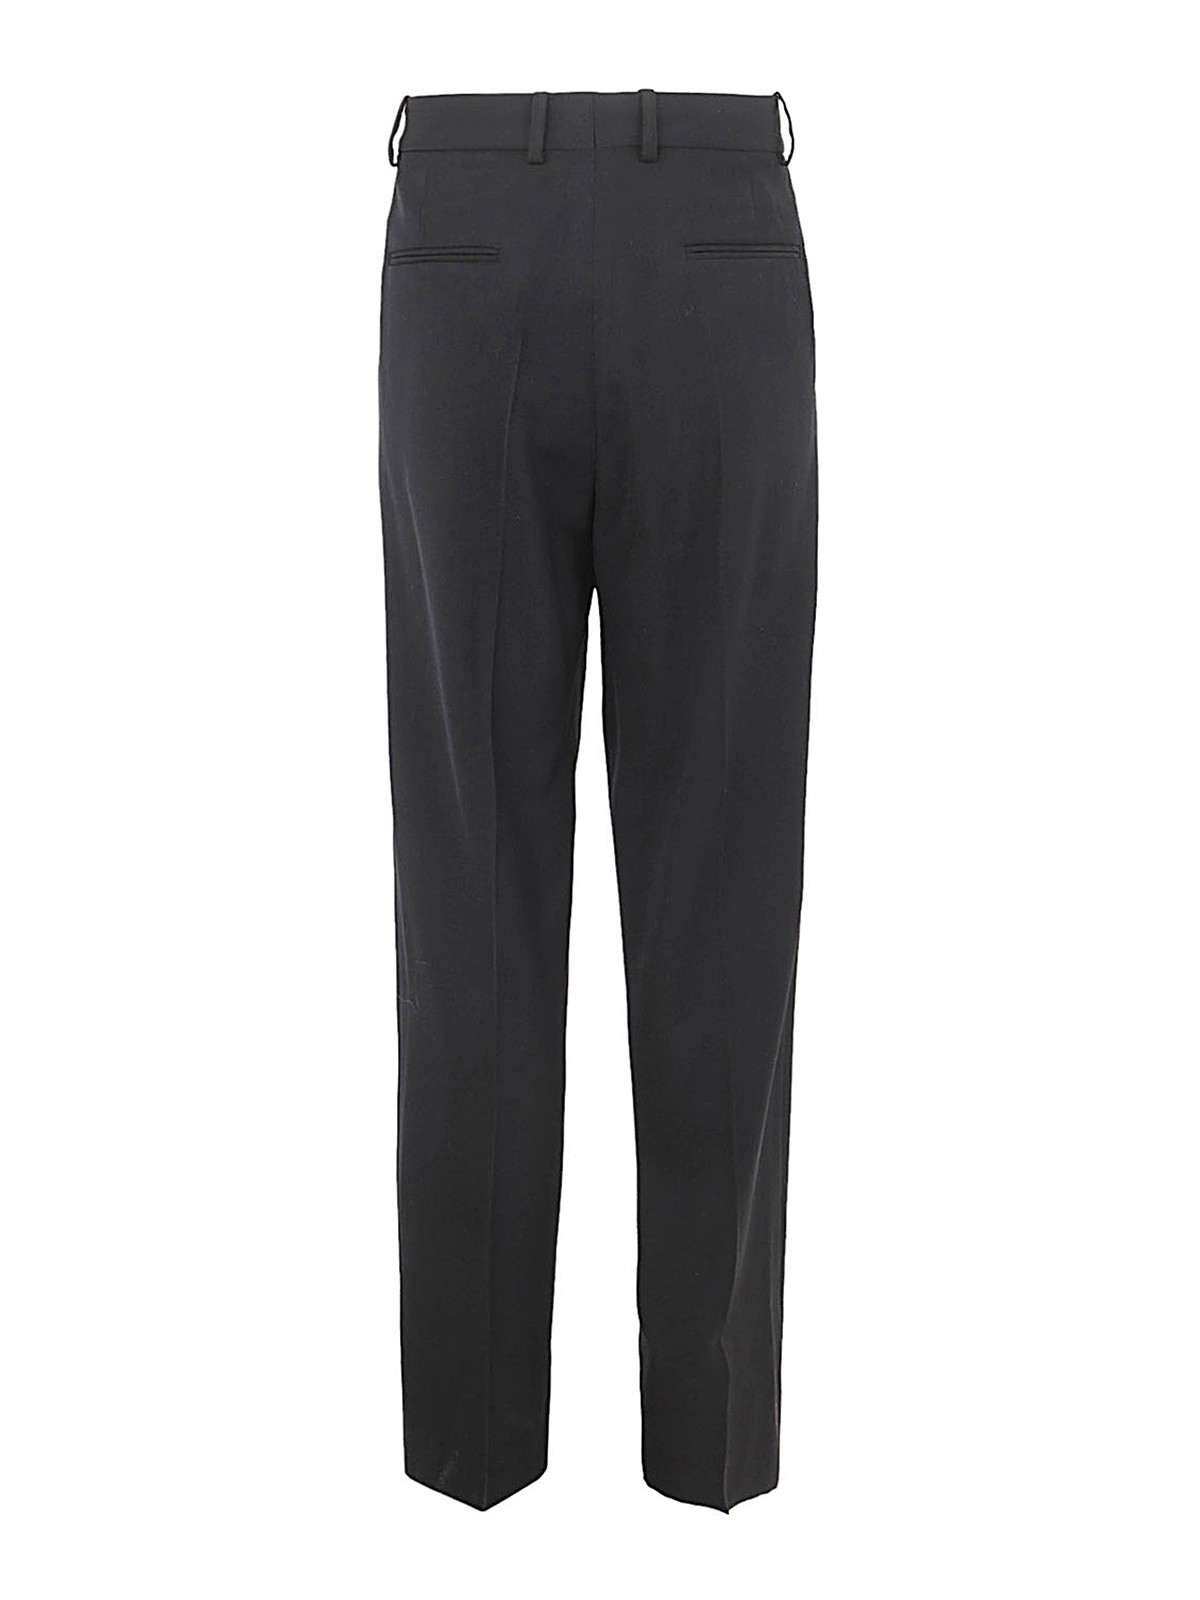 Classic trouser with pleat